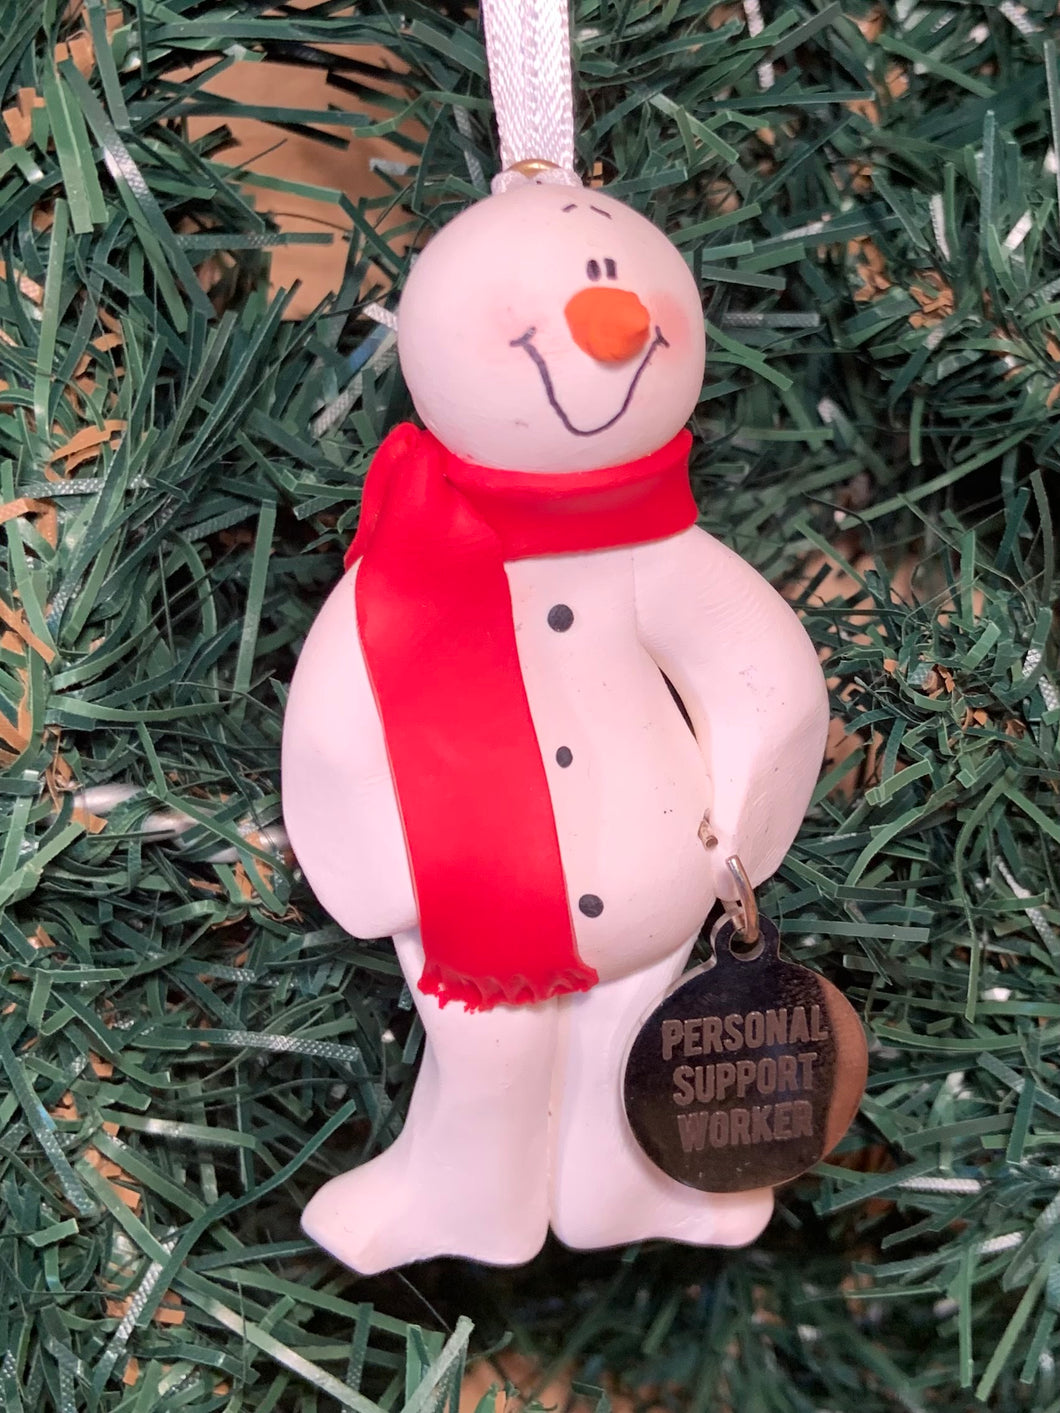 Personal Support Worker Snowman Tree Ornament